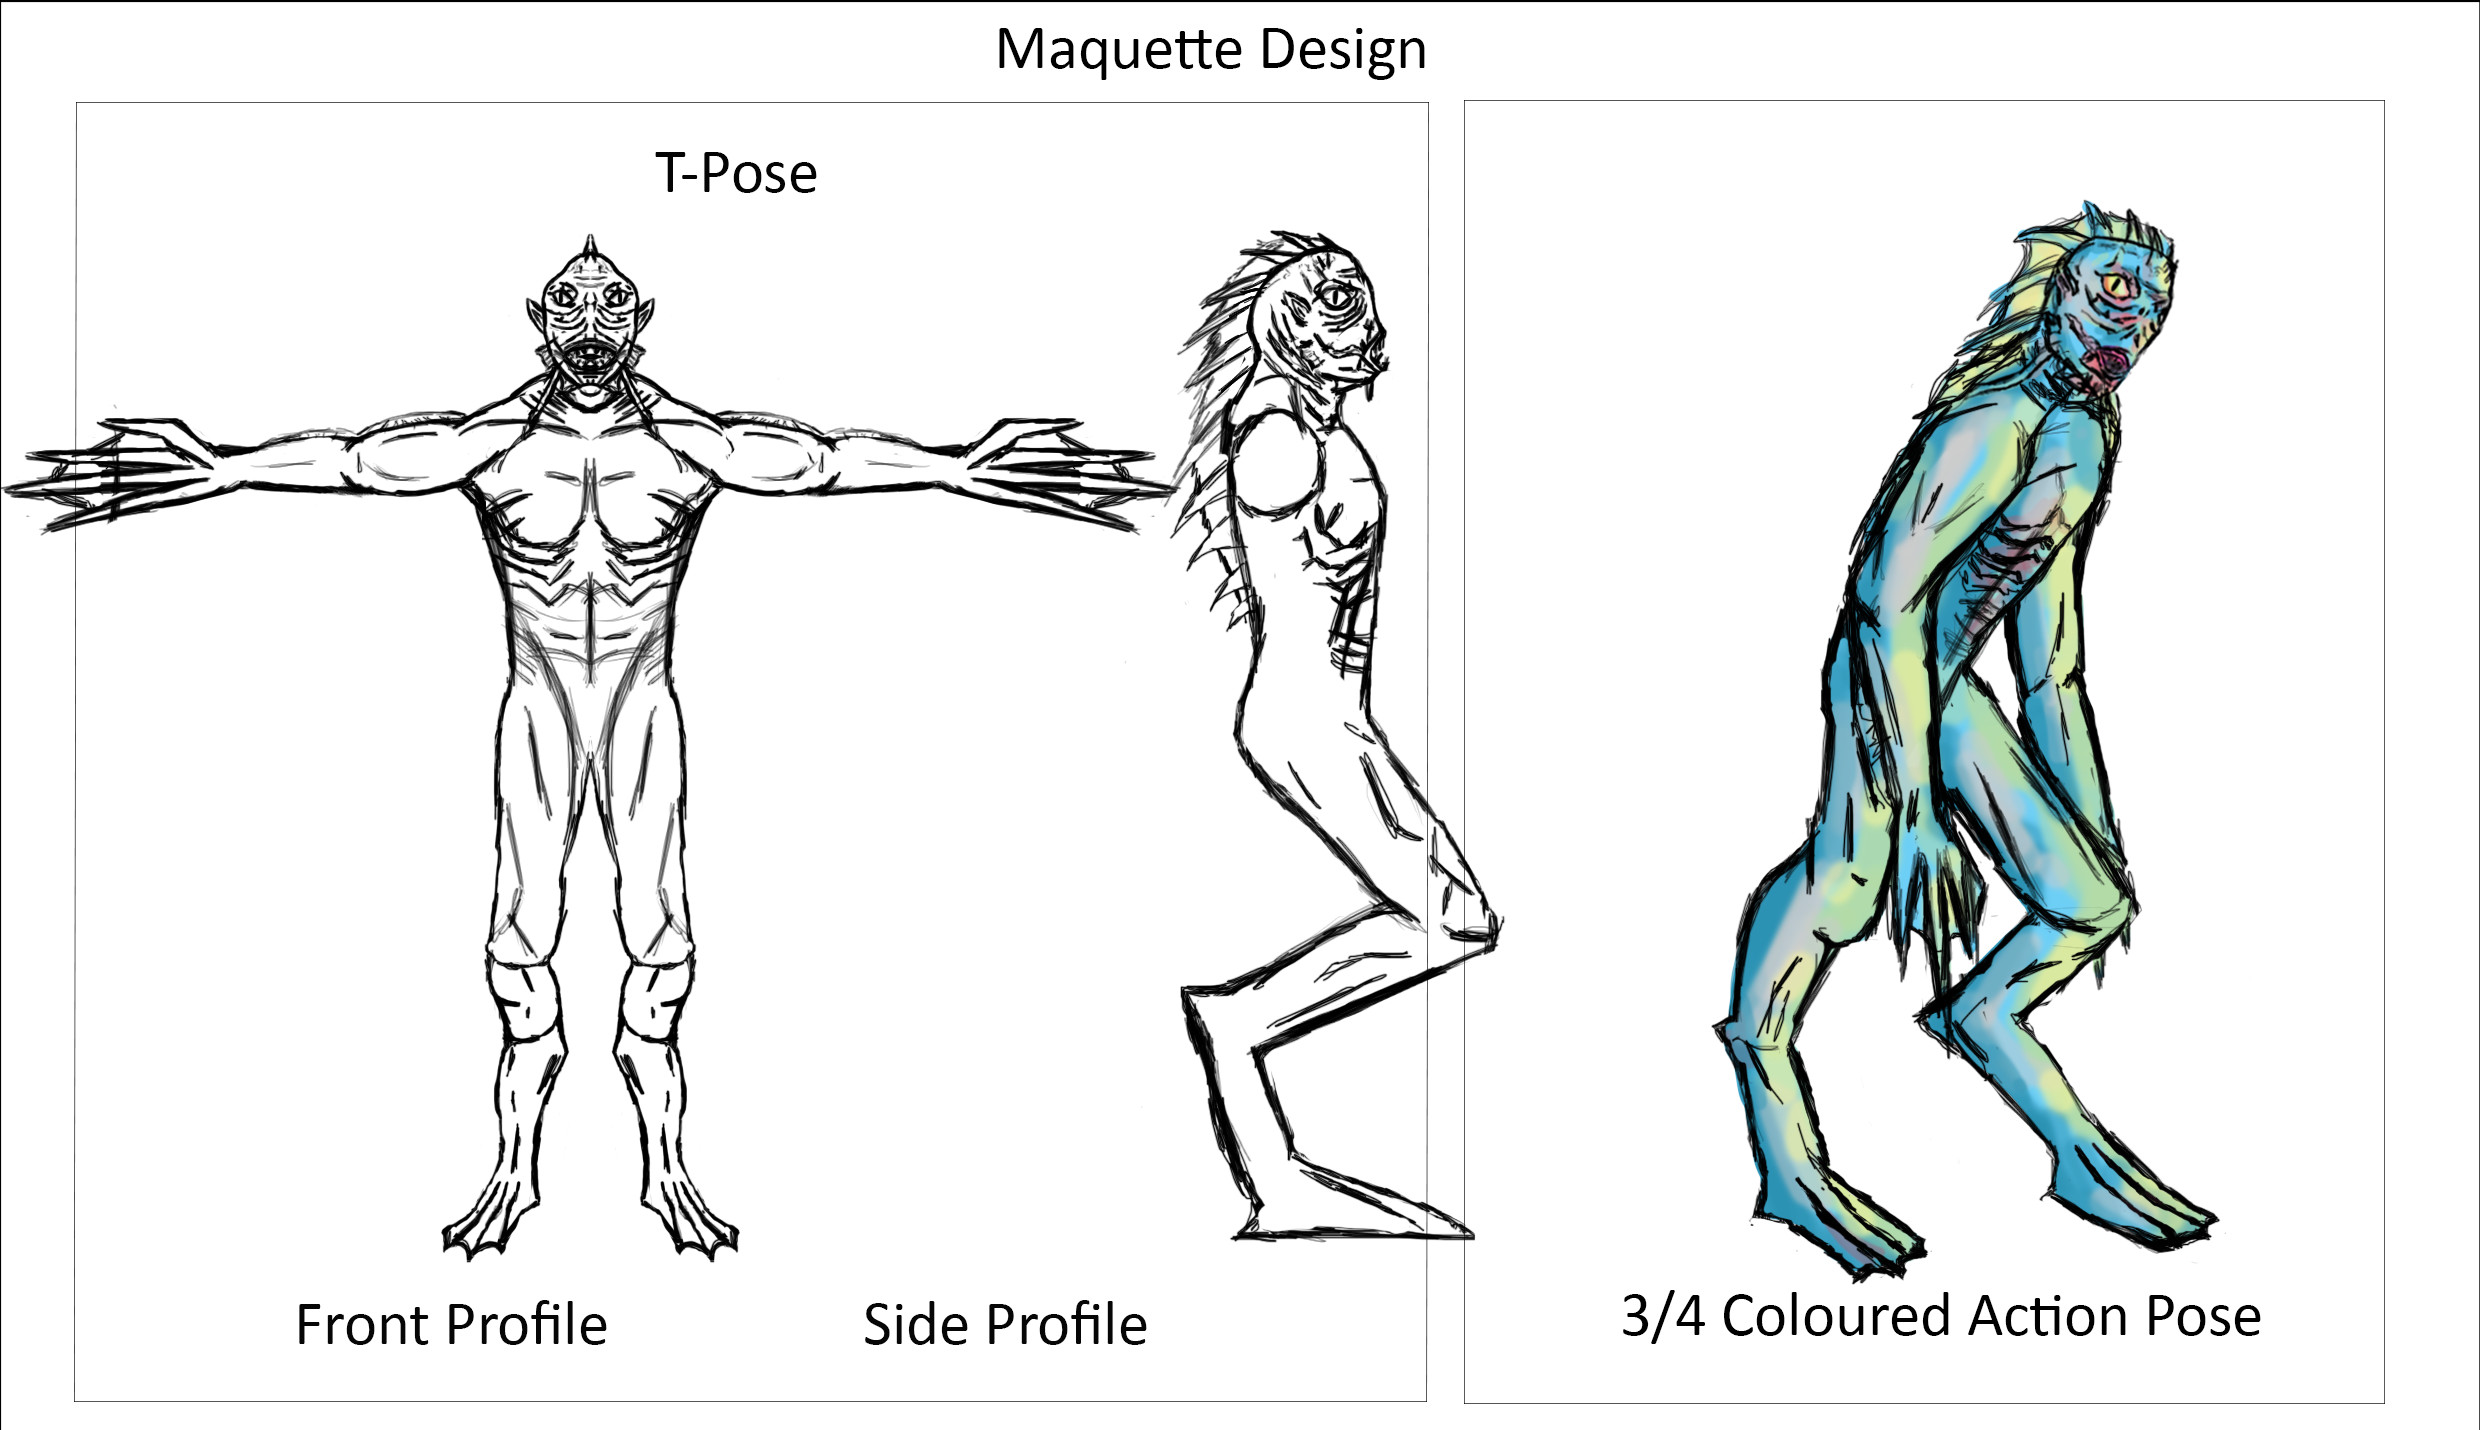 Maquette Design Drawings